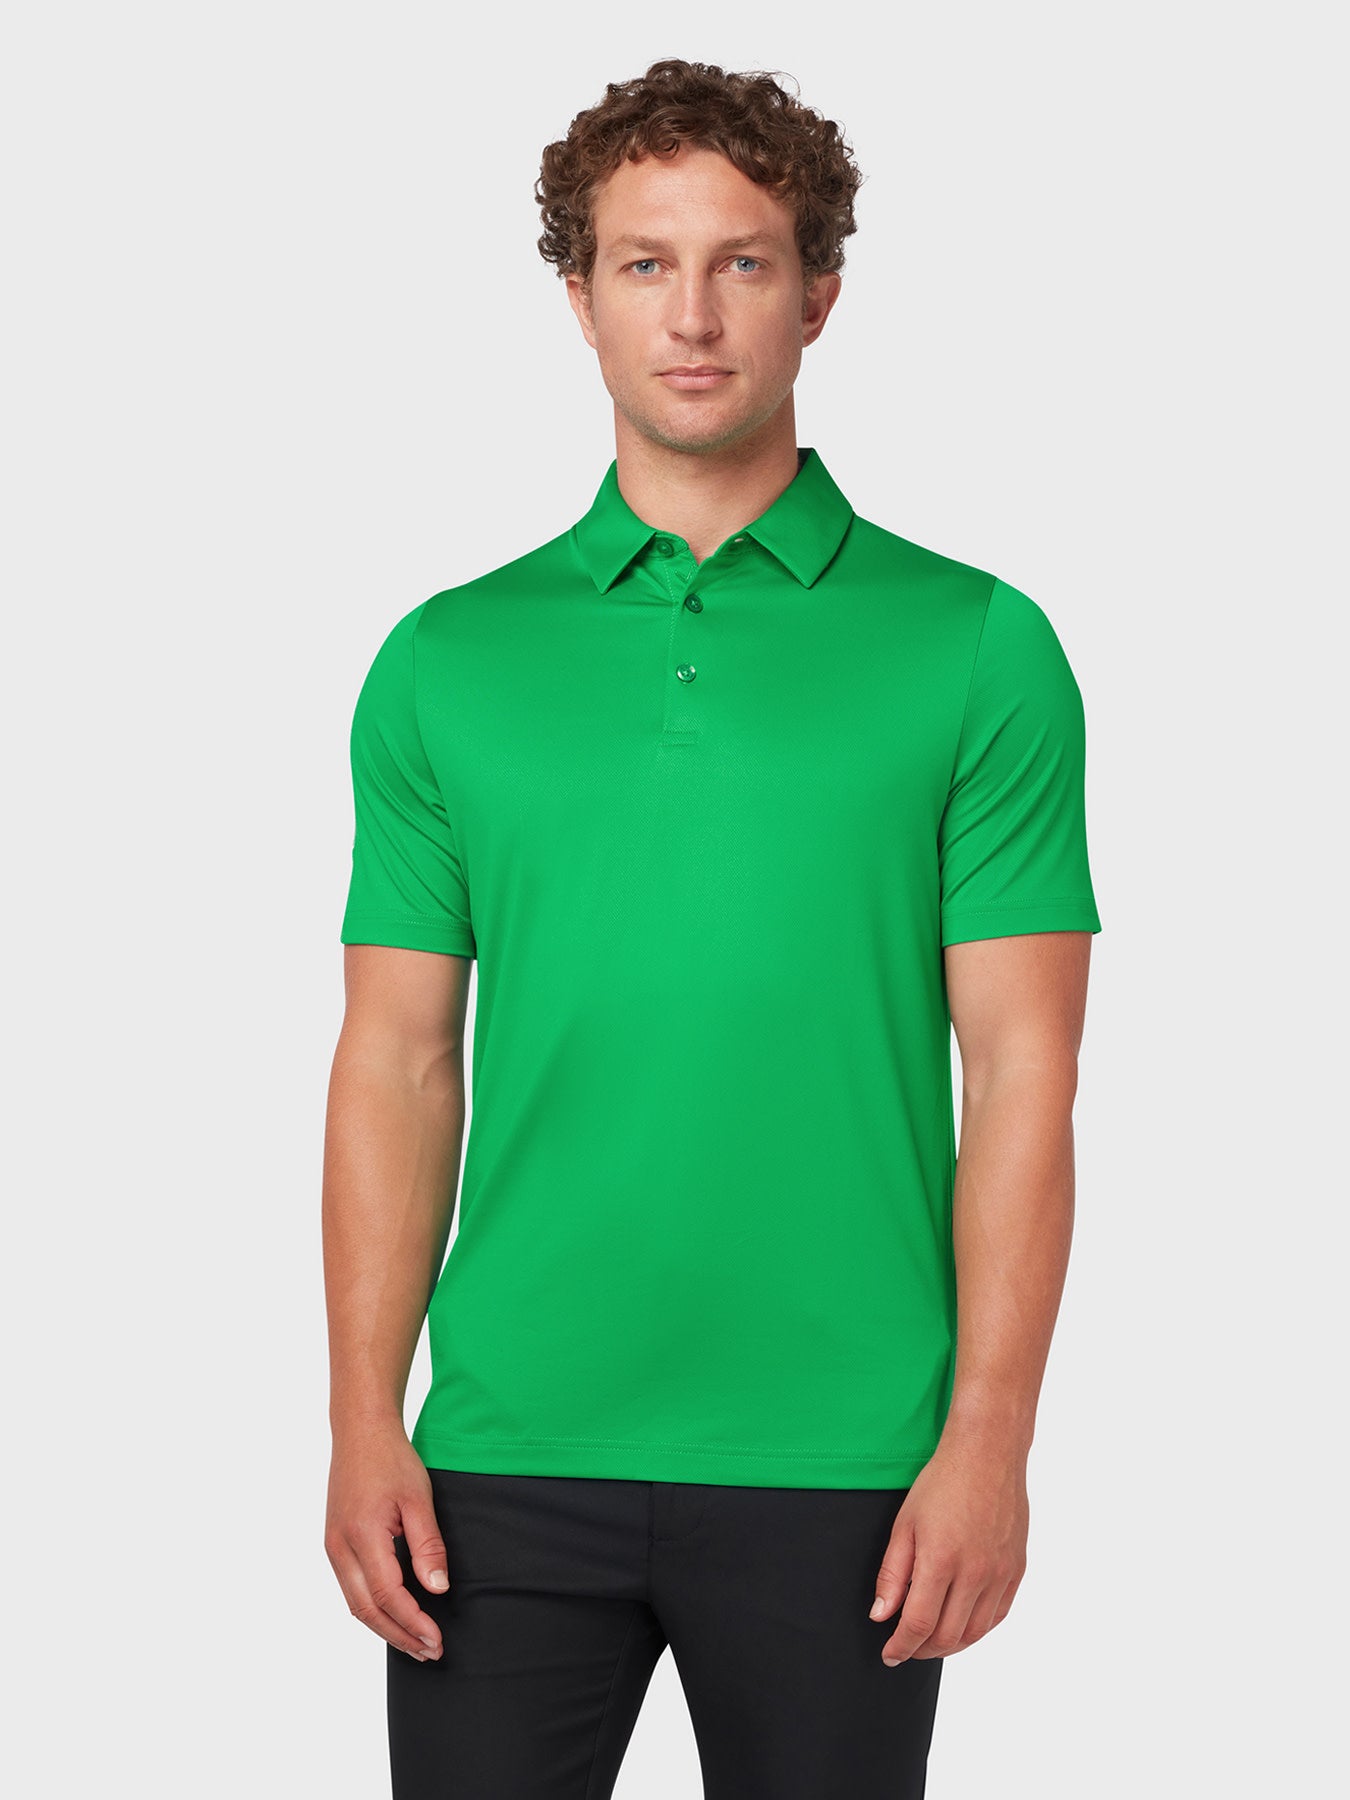 View Swing Tech Tour Polo In Golf Green Golf Green L information